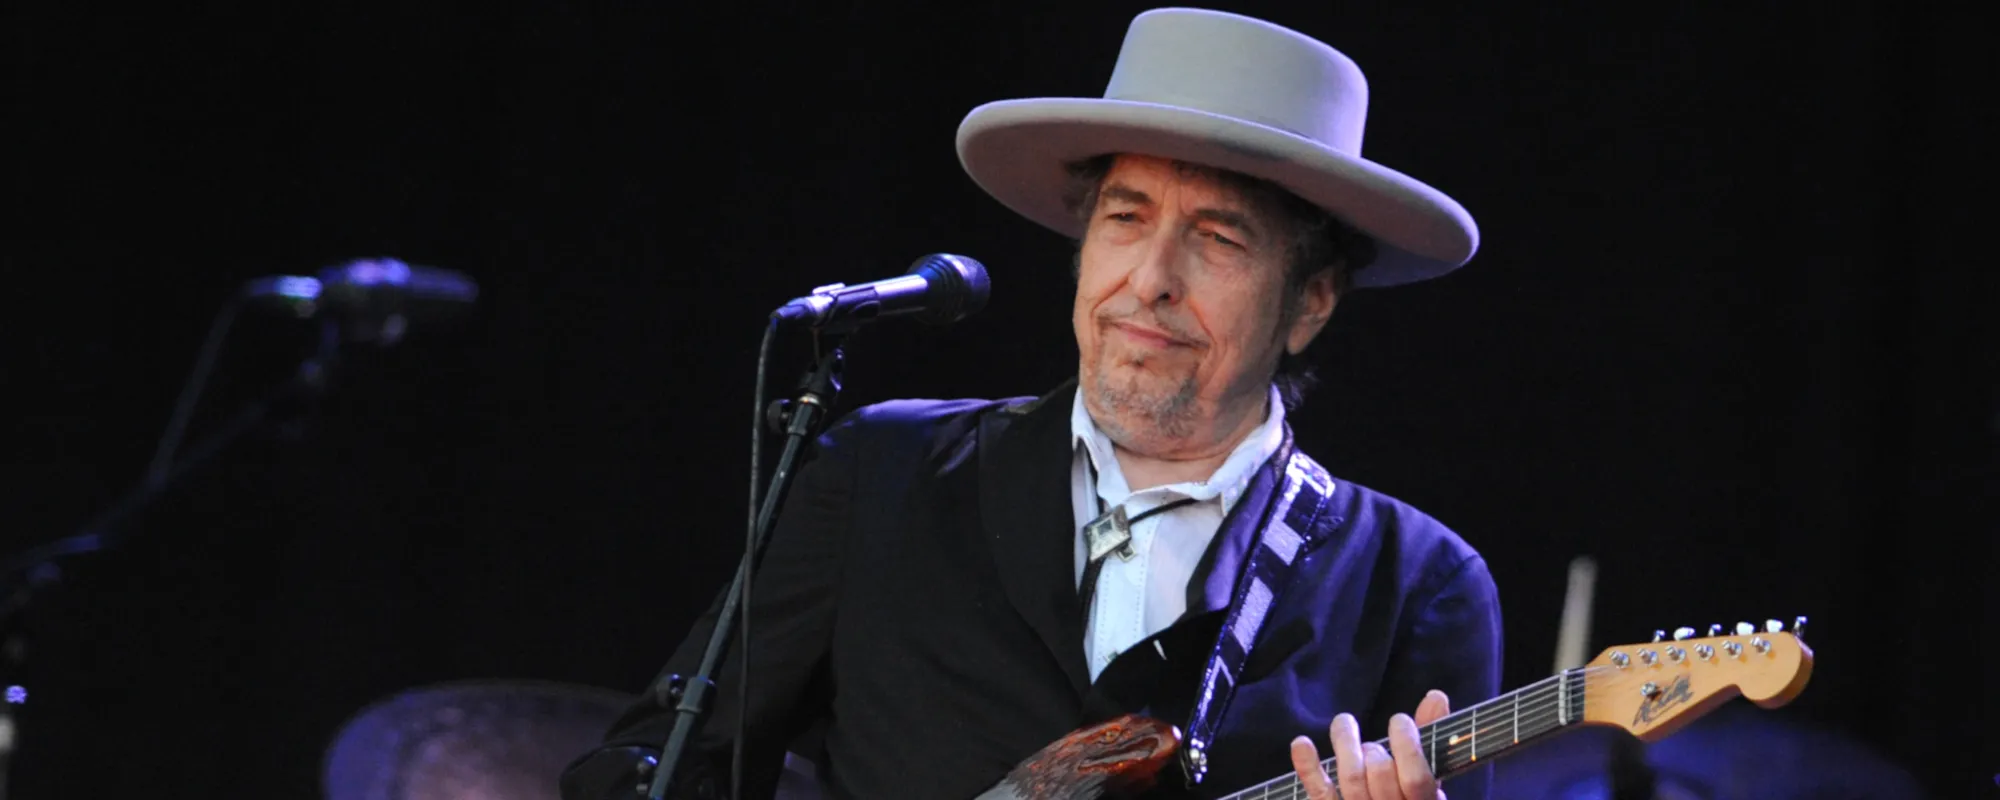 Bob Dylan to Release ‘Time Out of Mind Sessions’ Deluxe Box Set